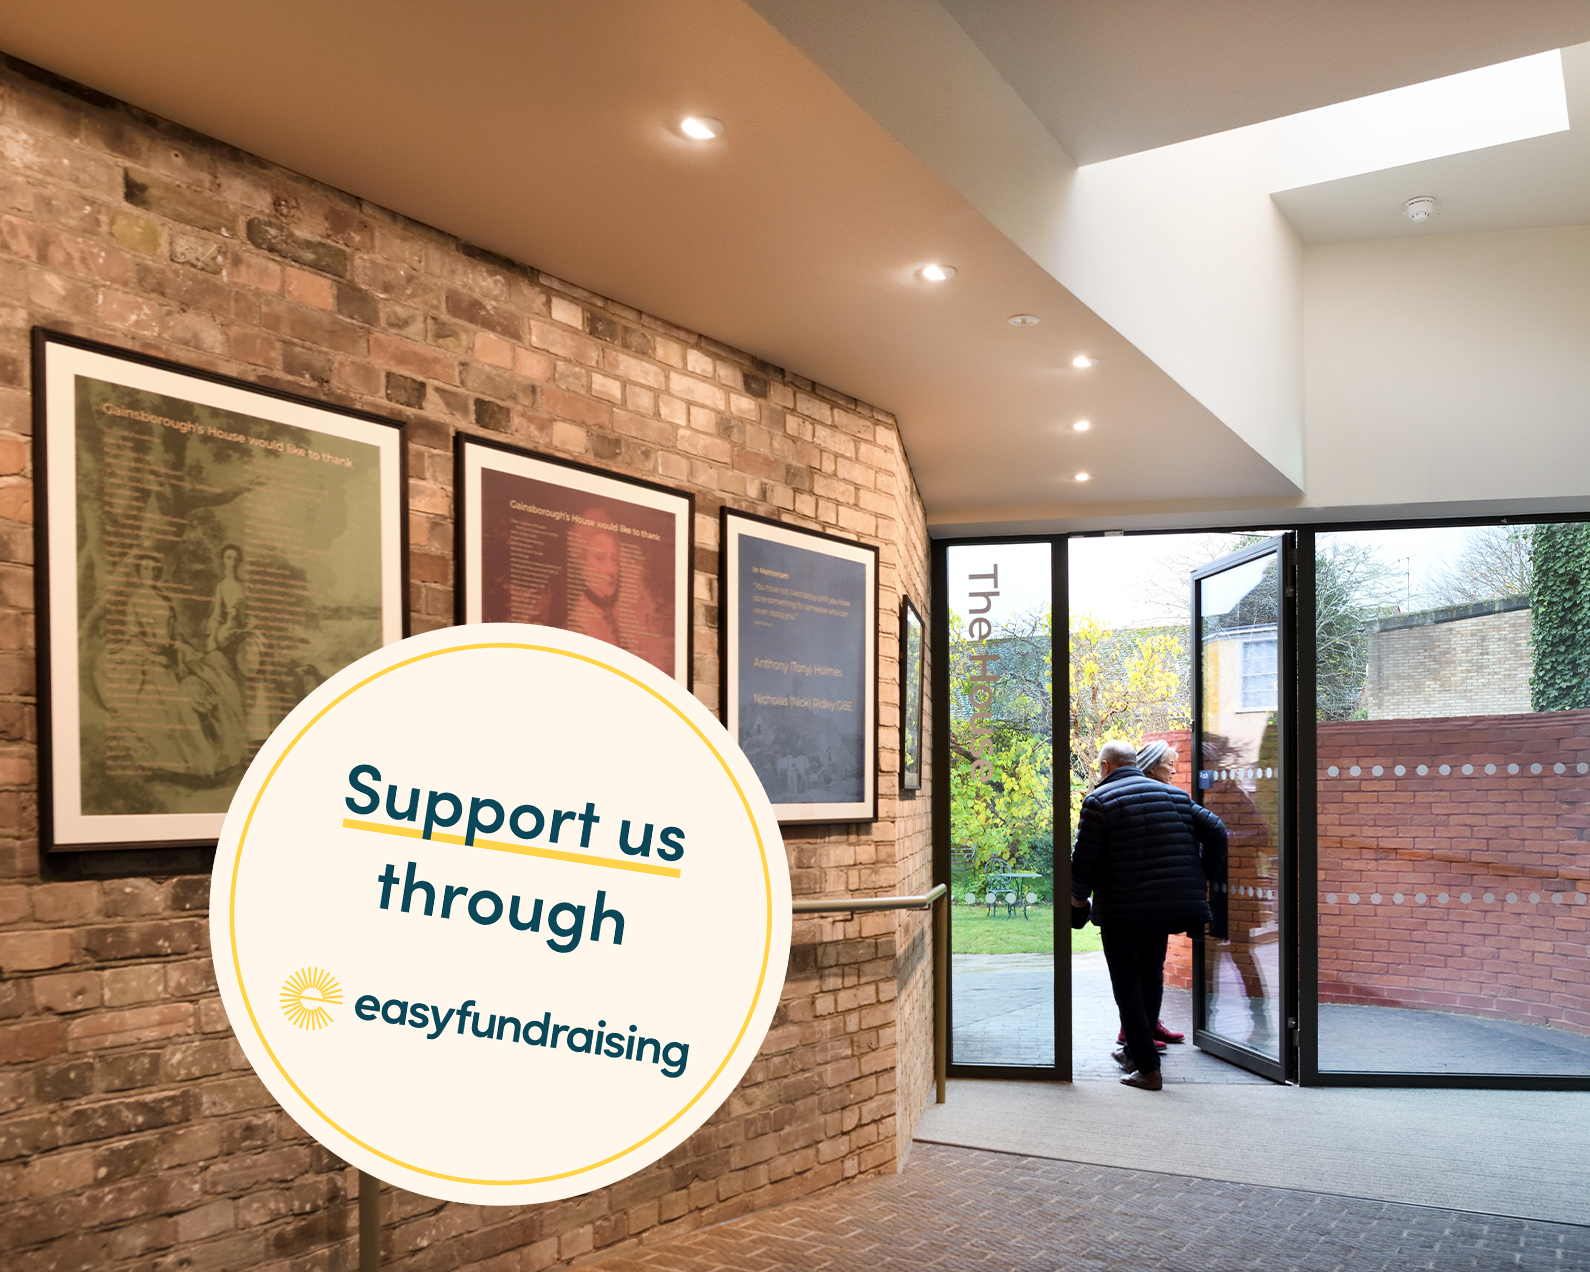 An image of the lobby area at Gainsborough's House. There are silk donor panels on the walls and two visitors exiting into the garden. There is an overlayed graphic which reads 'Support us through easyfundraising'.